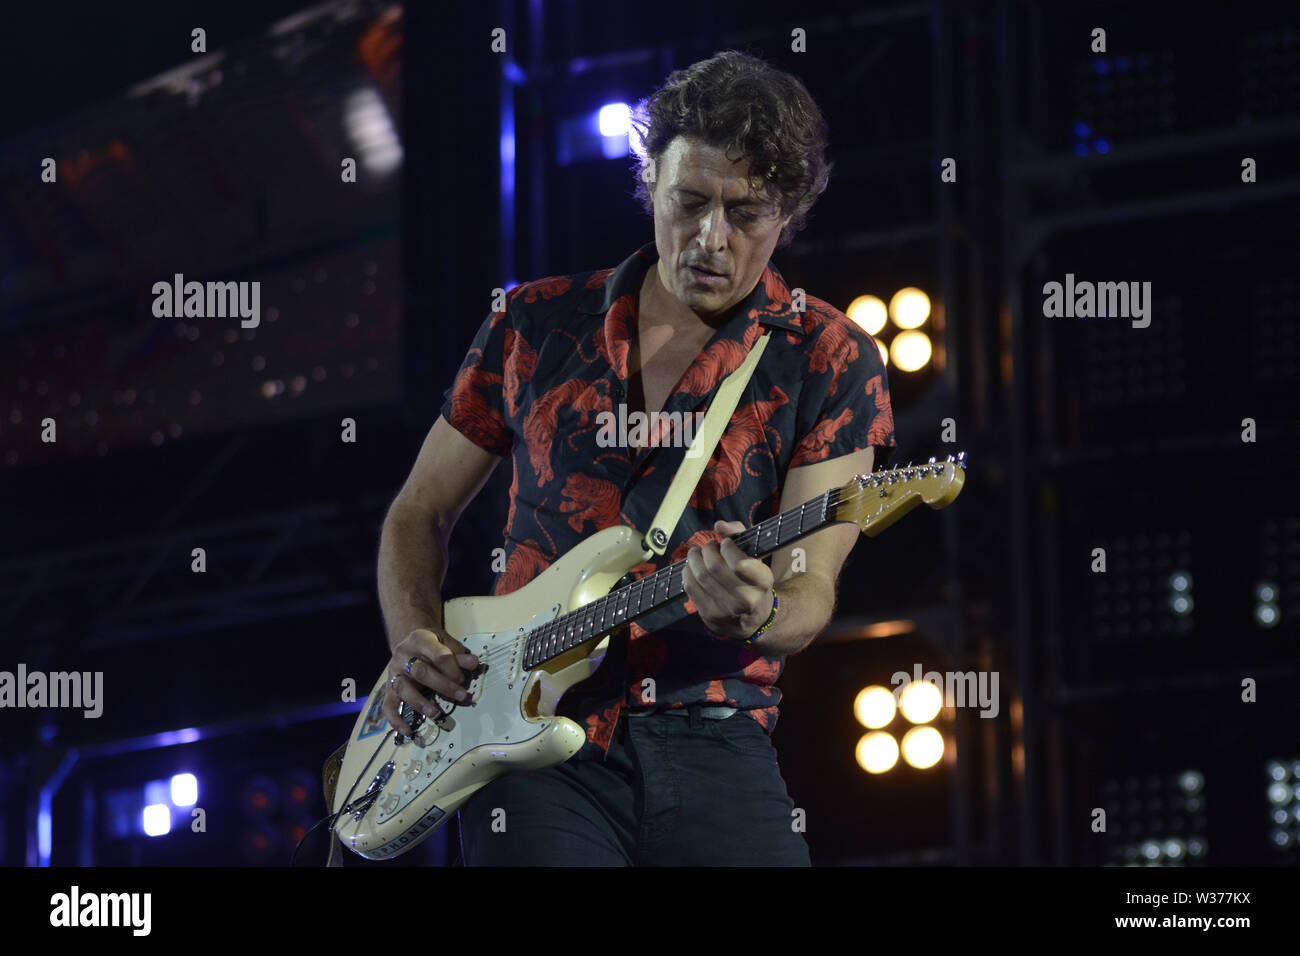 Rome, Italy. 12th July, 2019. The Italian guitarist Federico Poggipollini performs on stage for Luciano Ligabue at the Stadio Olimpico in Rome for his 'Start Tour 2019'. Credit: Mariano Montella/Pacific Press/Alamy Live News Stock Photo